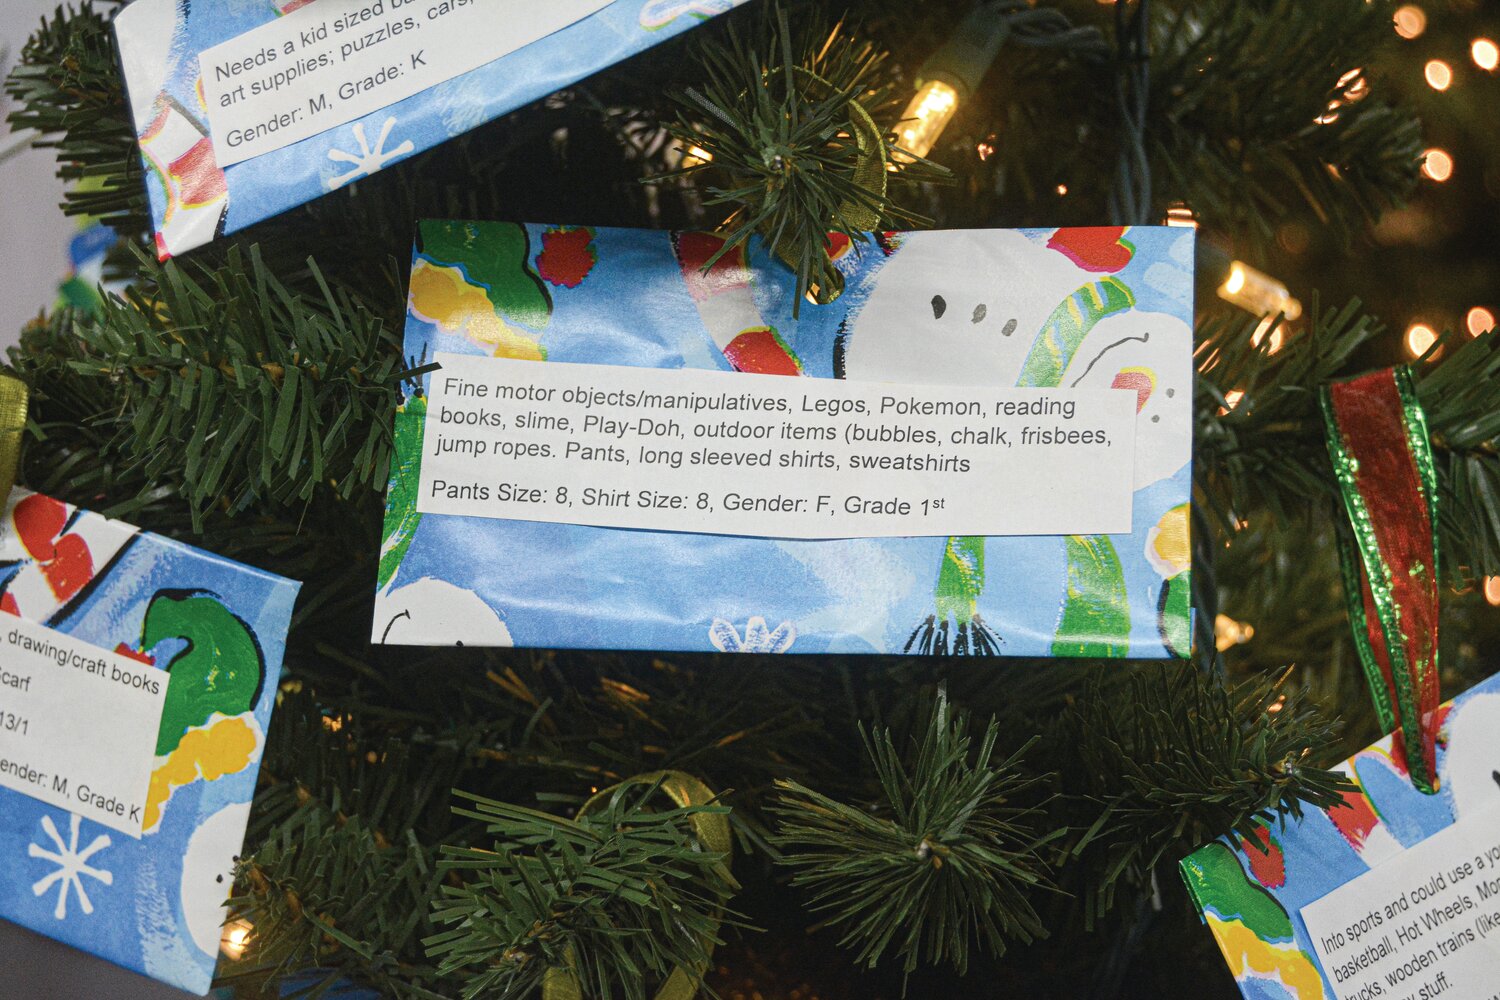 Students' requests on the giving tree at Funtime Toys and Gifts.